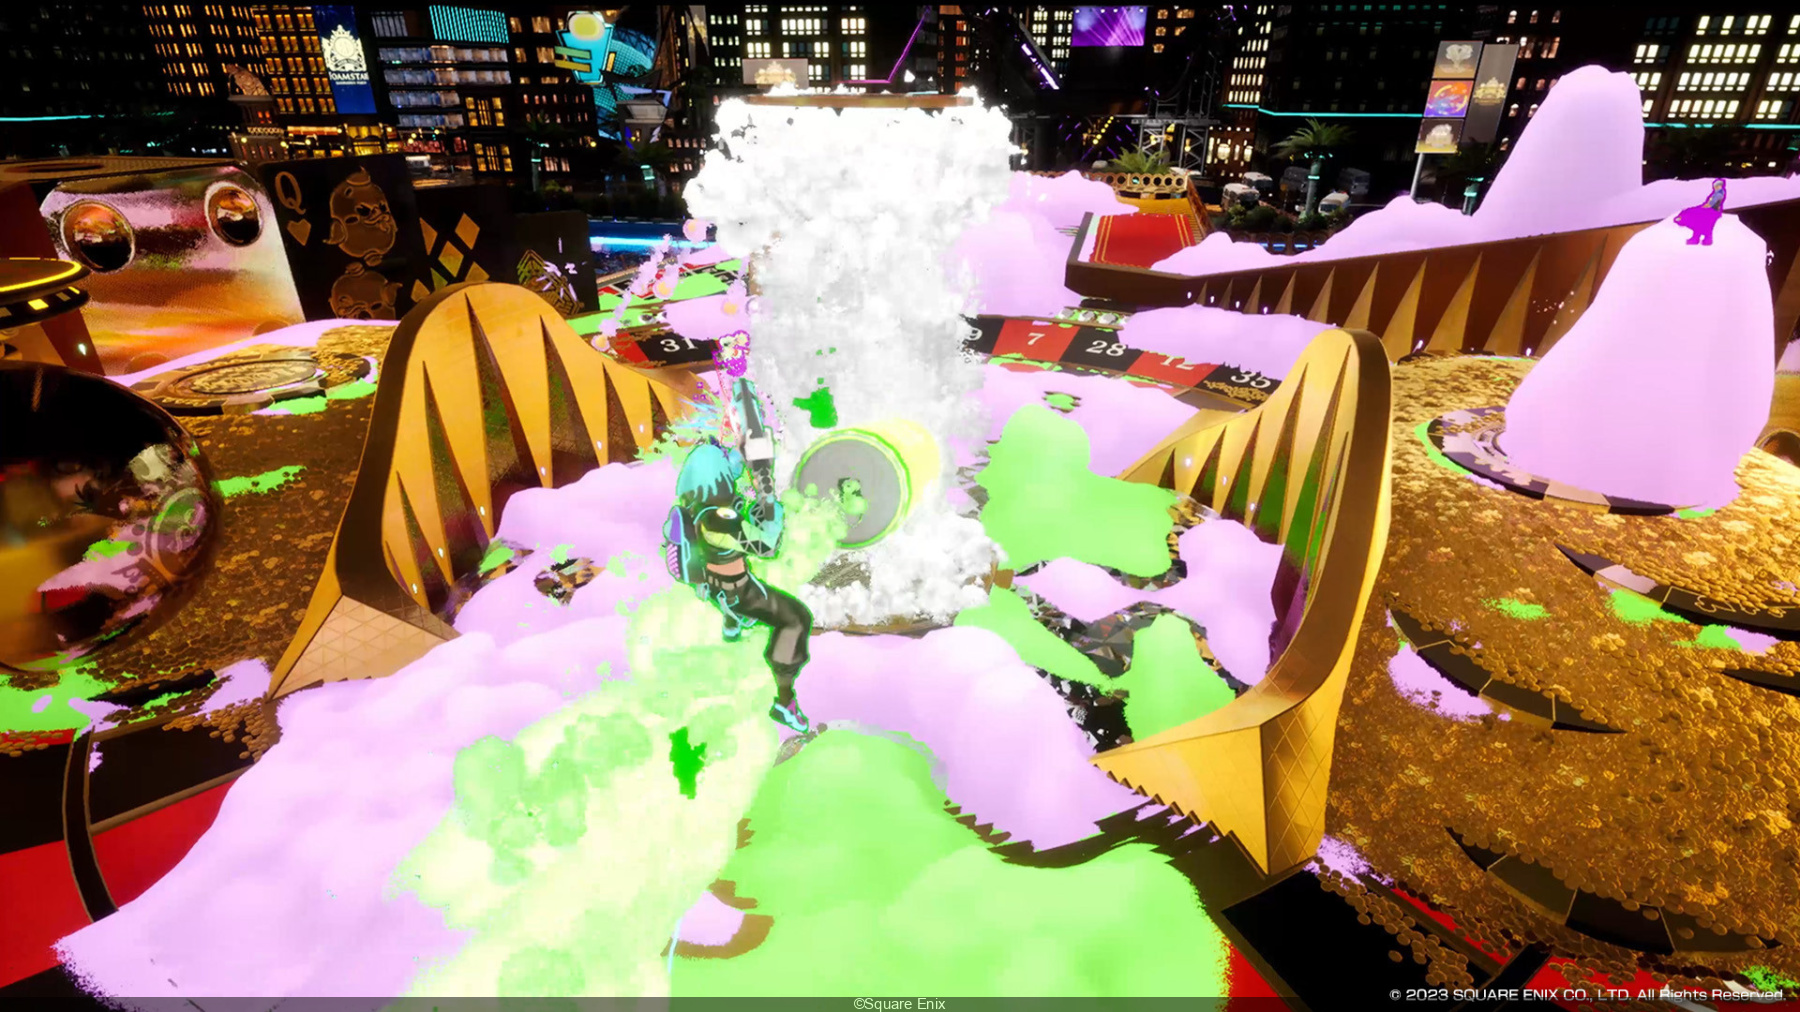 PlayStation State of Play: Foamstars, the splatoon like, is revealed in a  trailer 